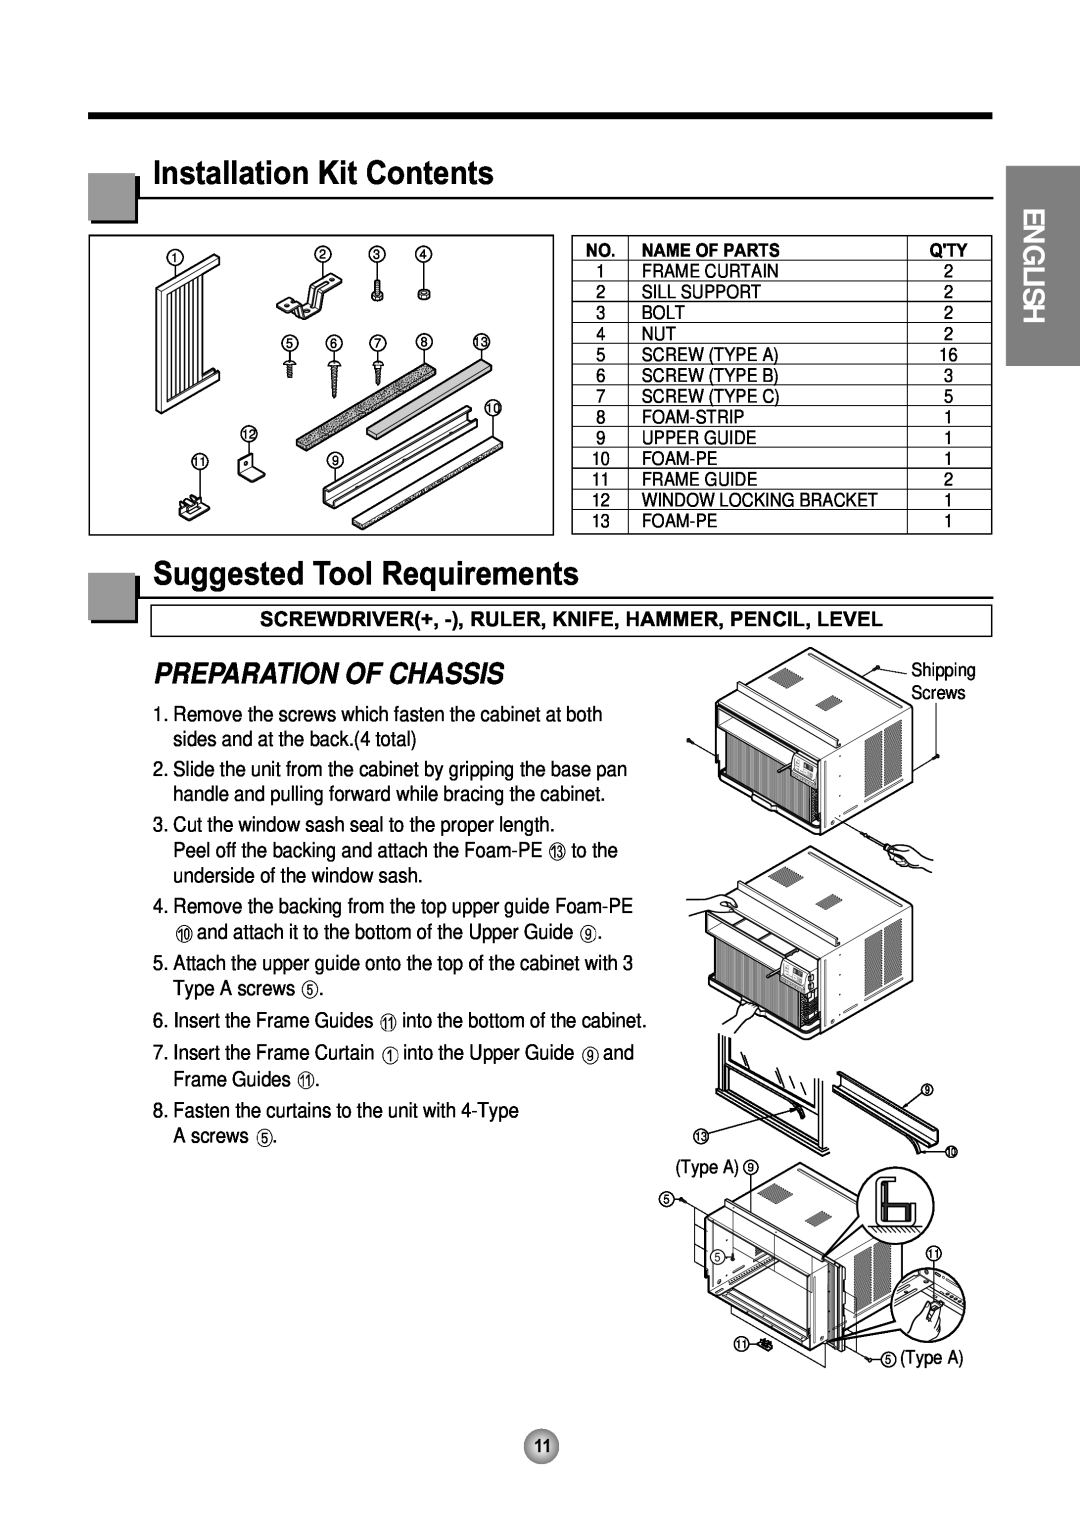 Friedrich ZQ08, ZQ10 Installation Kit Contents, Suggested Tool Requirements, English, Preparation Of Chassis 